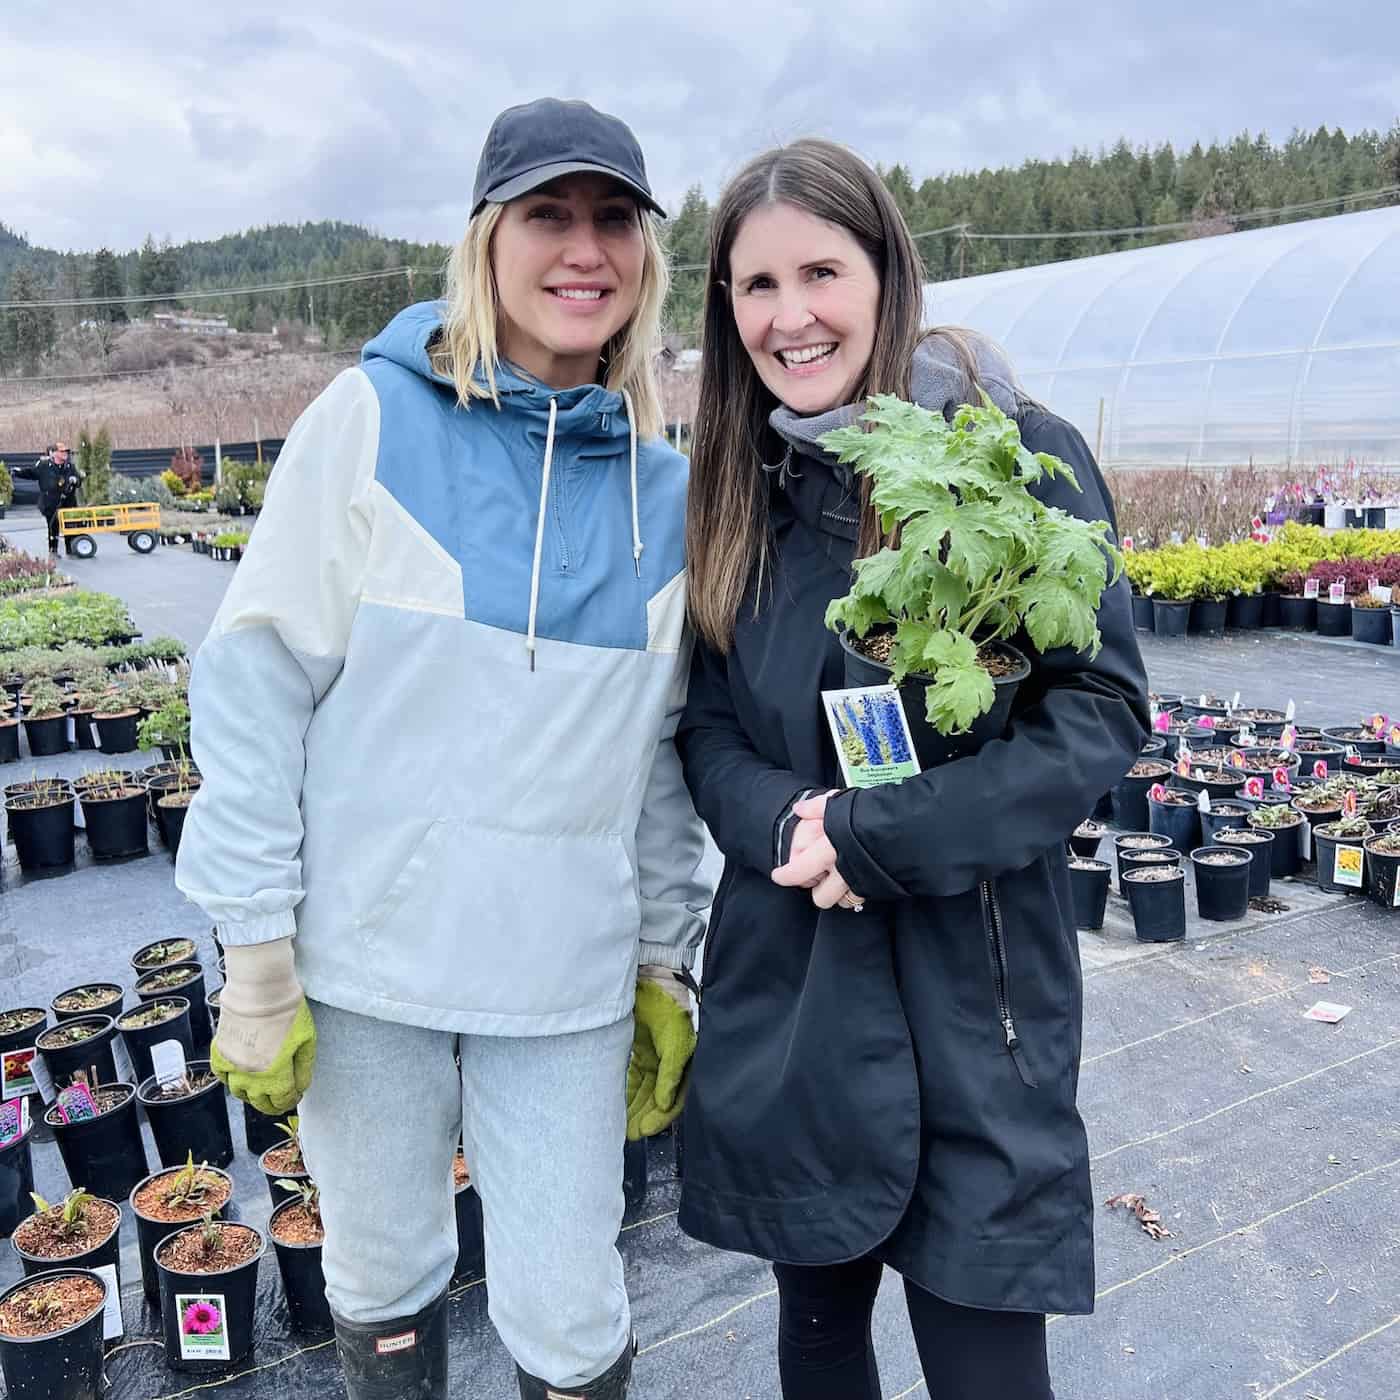 Planting flowers in april - anna from kel lake garden center with mary jane duford